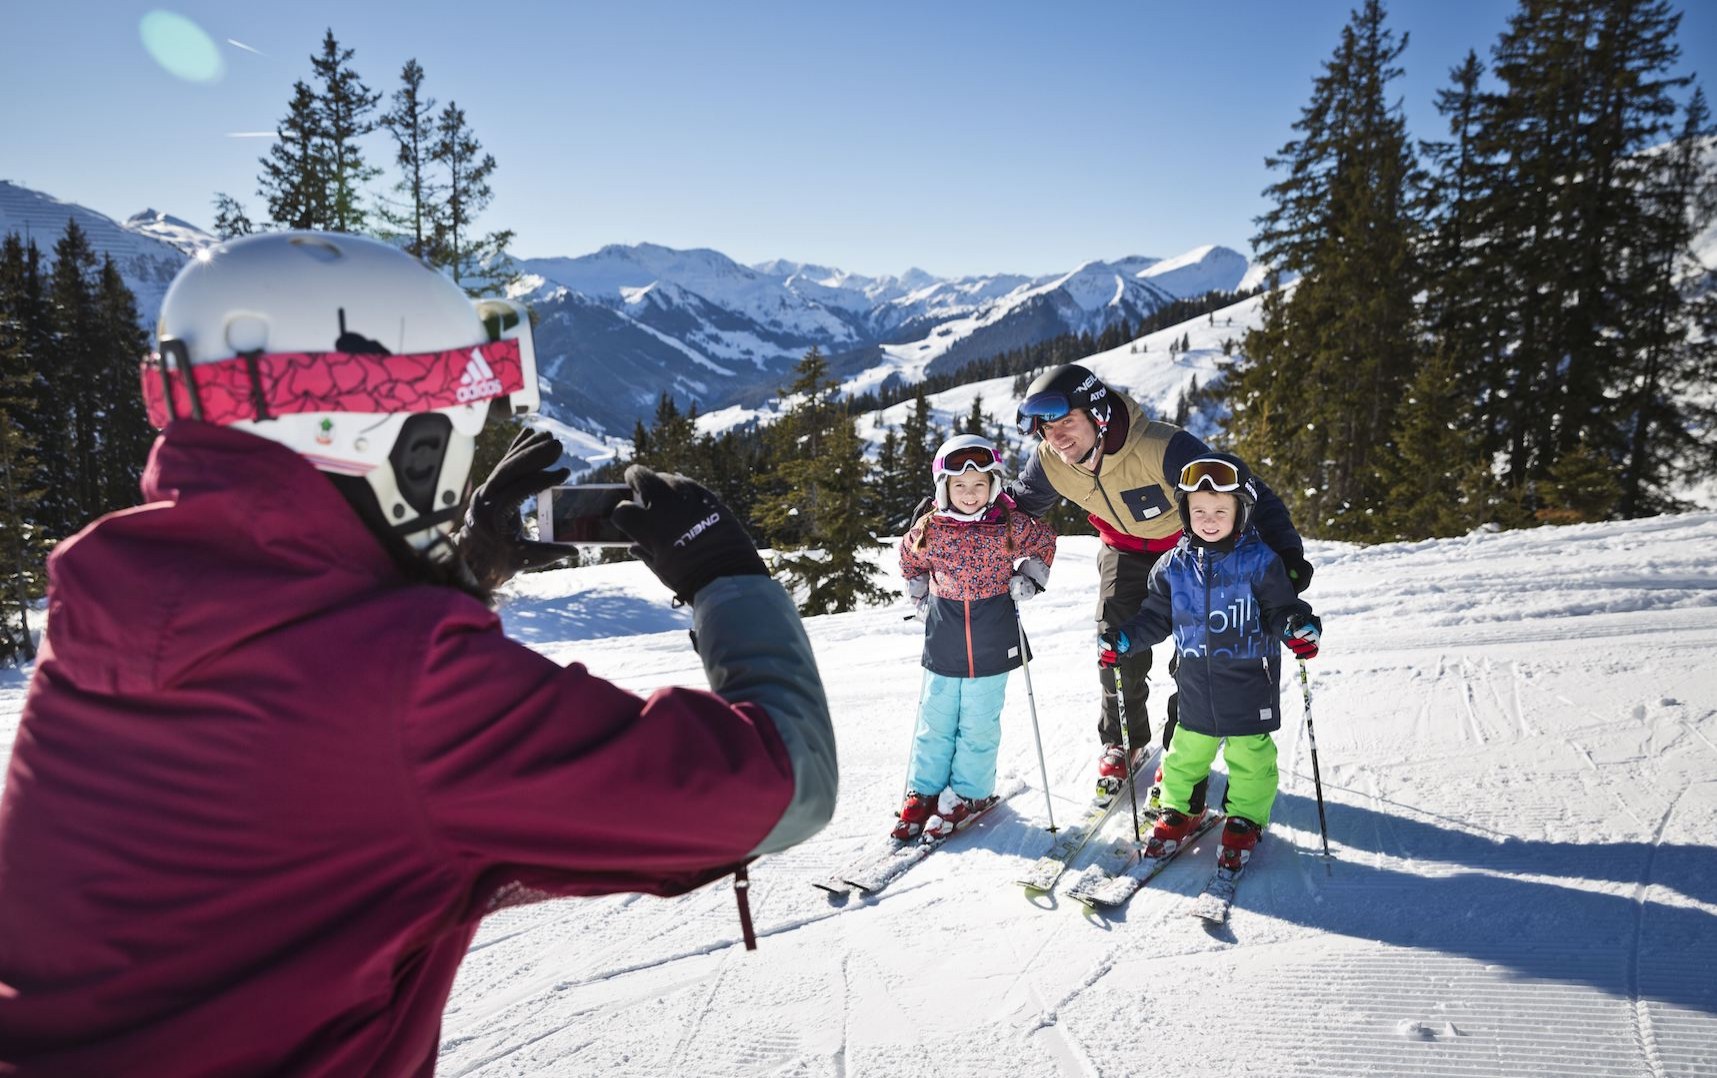 Fun for all ages at the Ski Resort Saalbach-Hinterglemm